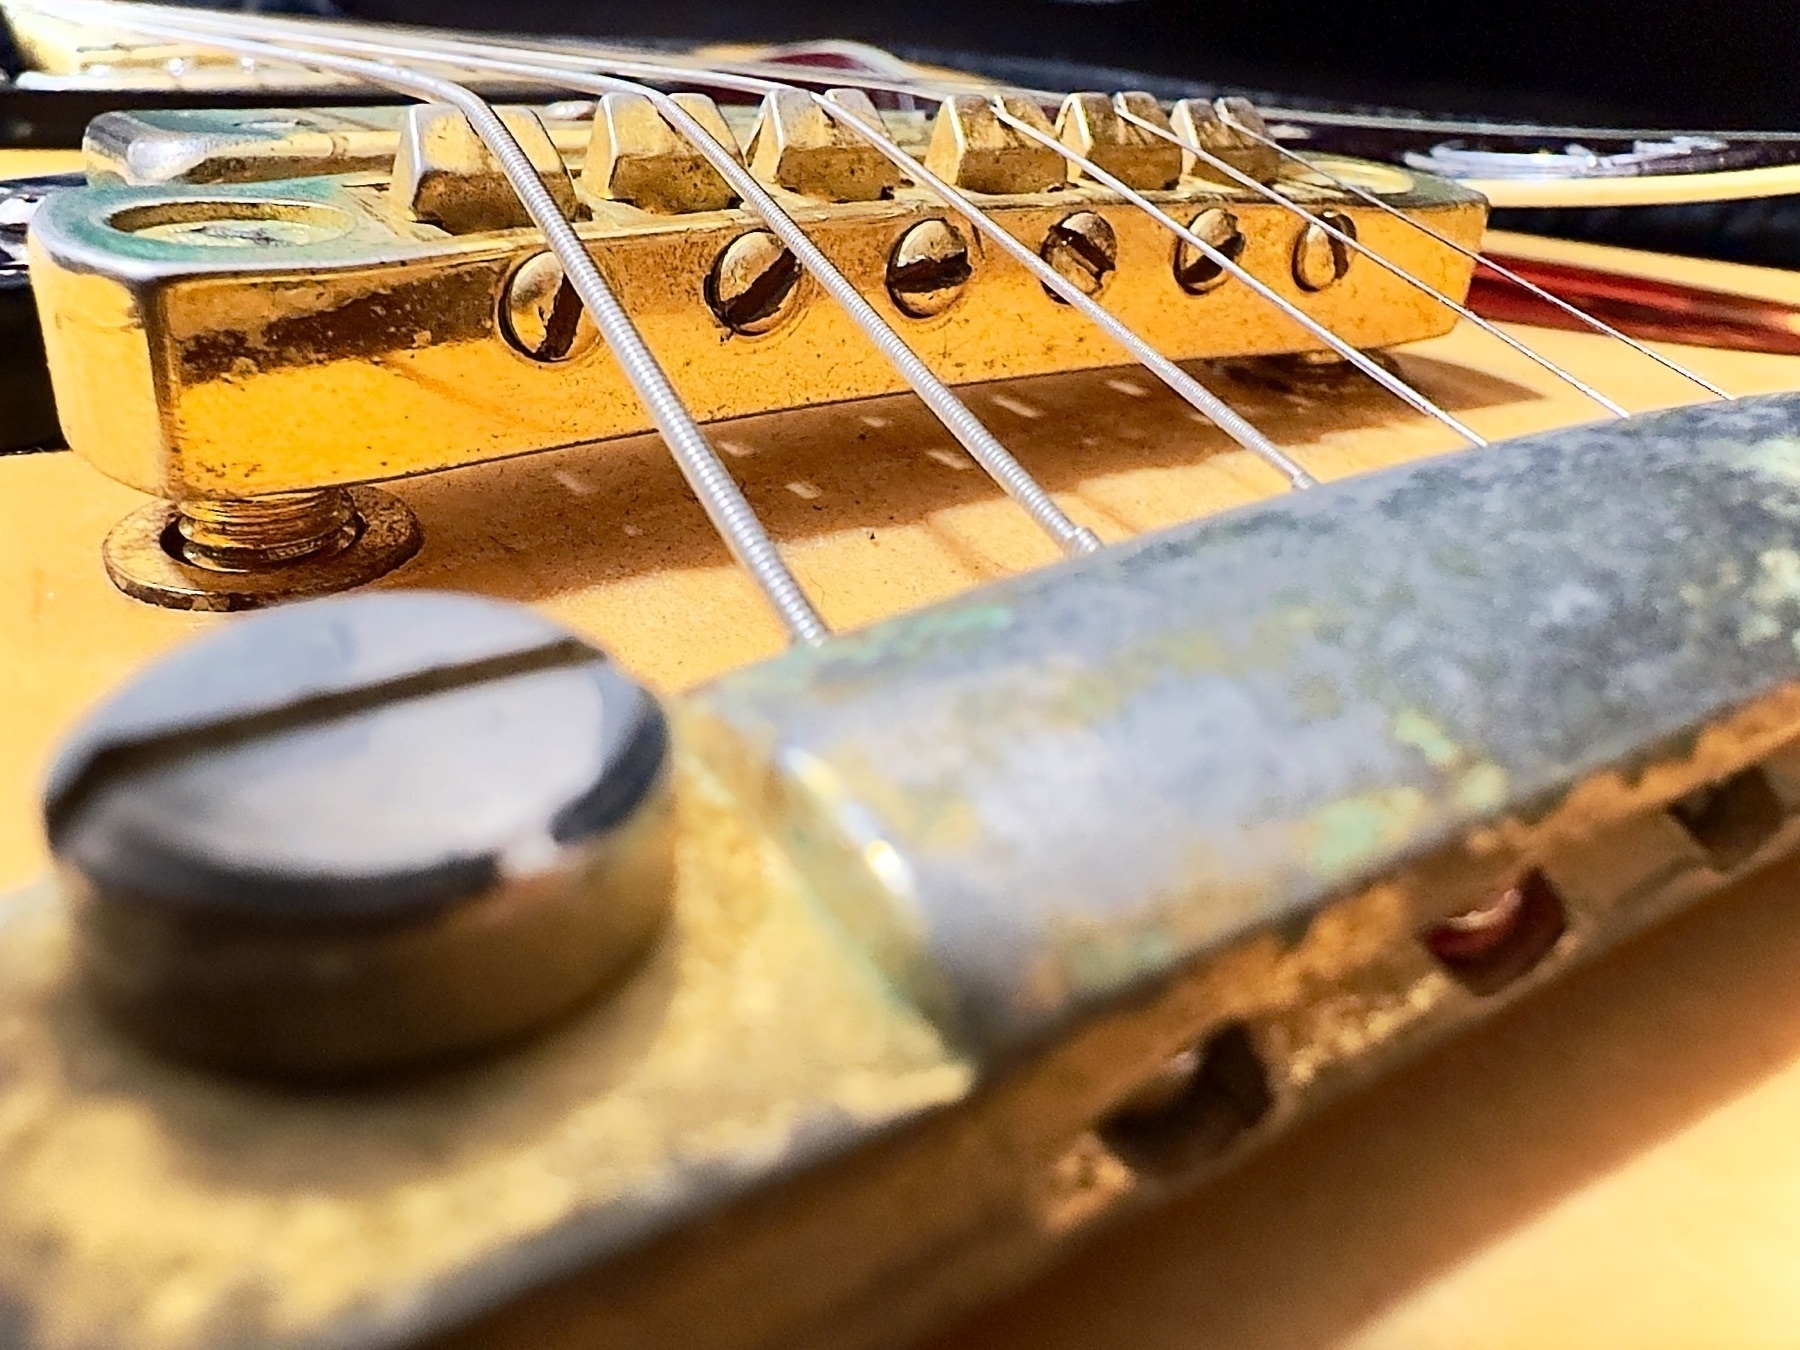 An extreme closeup of the bridge of an Epiphone Sheraton II guitar, looking flat across from the bridge to the saddles.